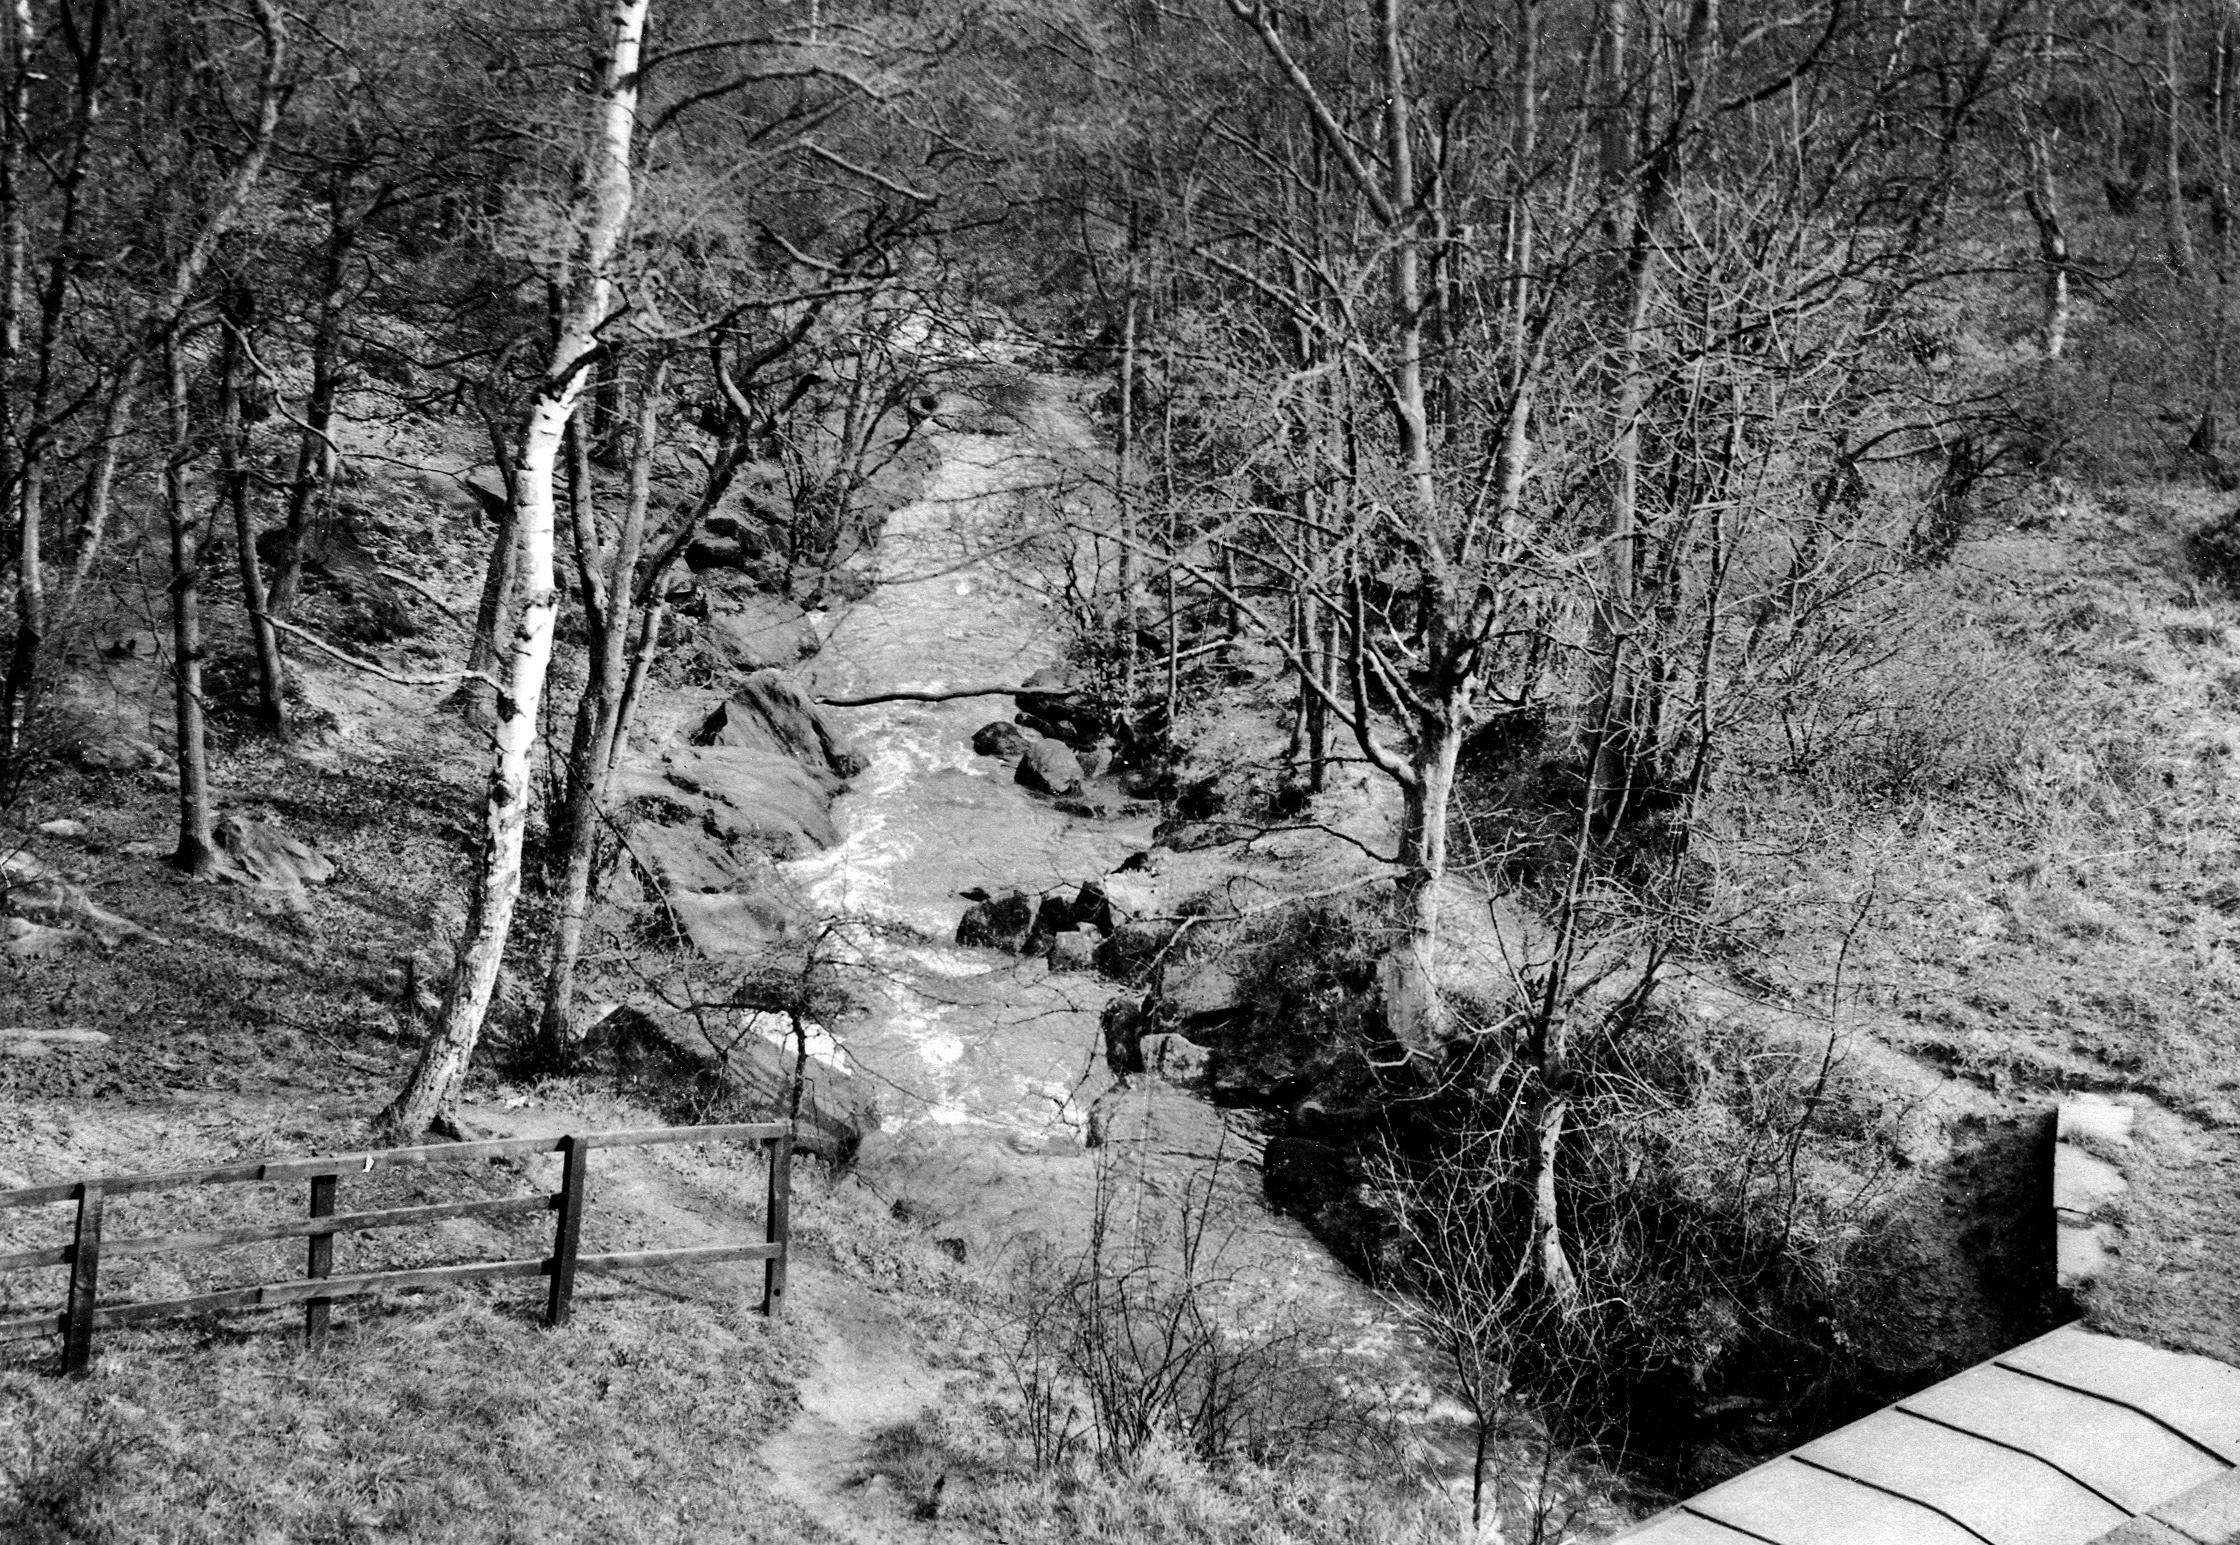 The Hollies, Meanwood Beck Trout Stream, undated